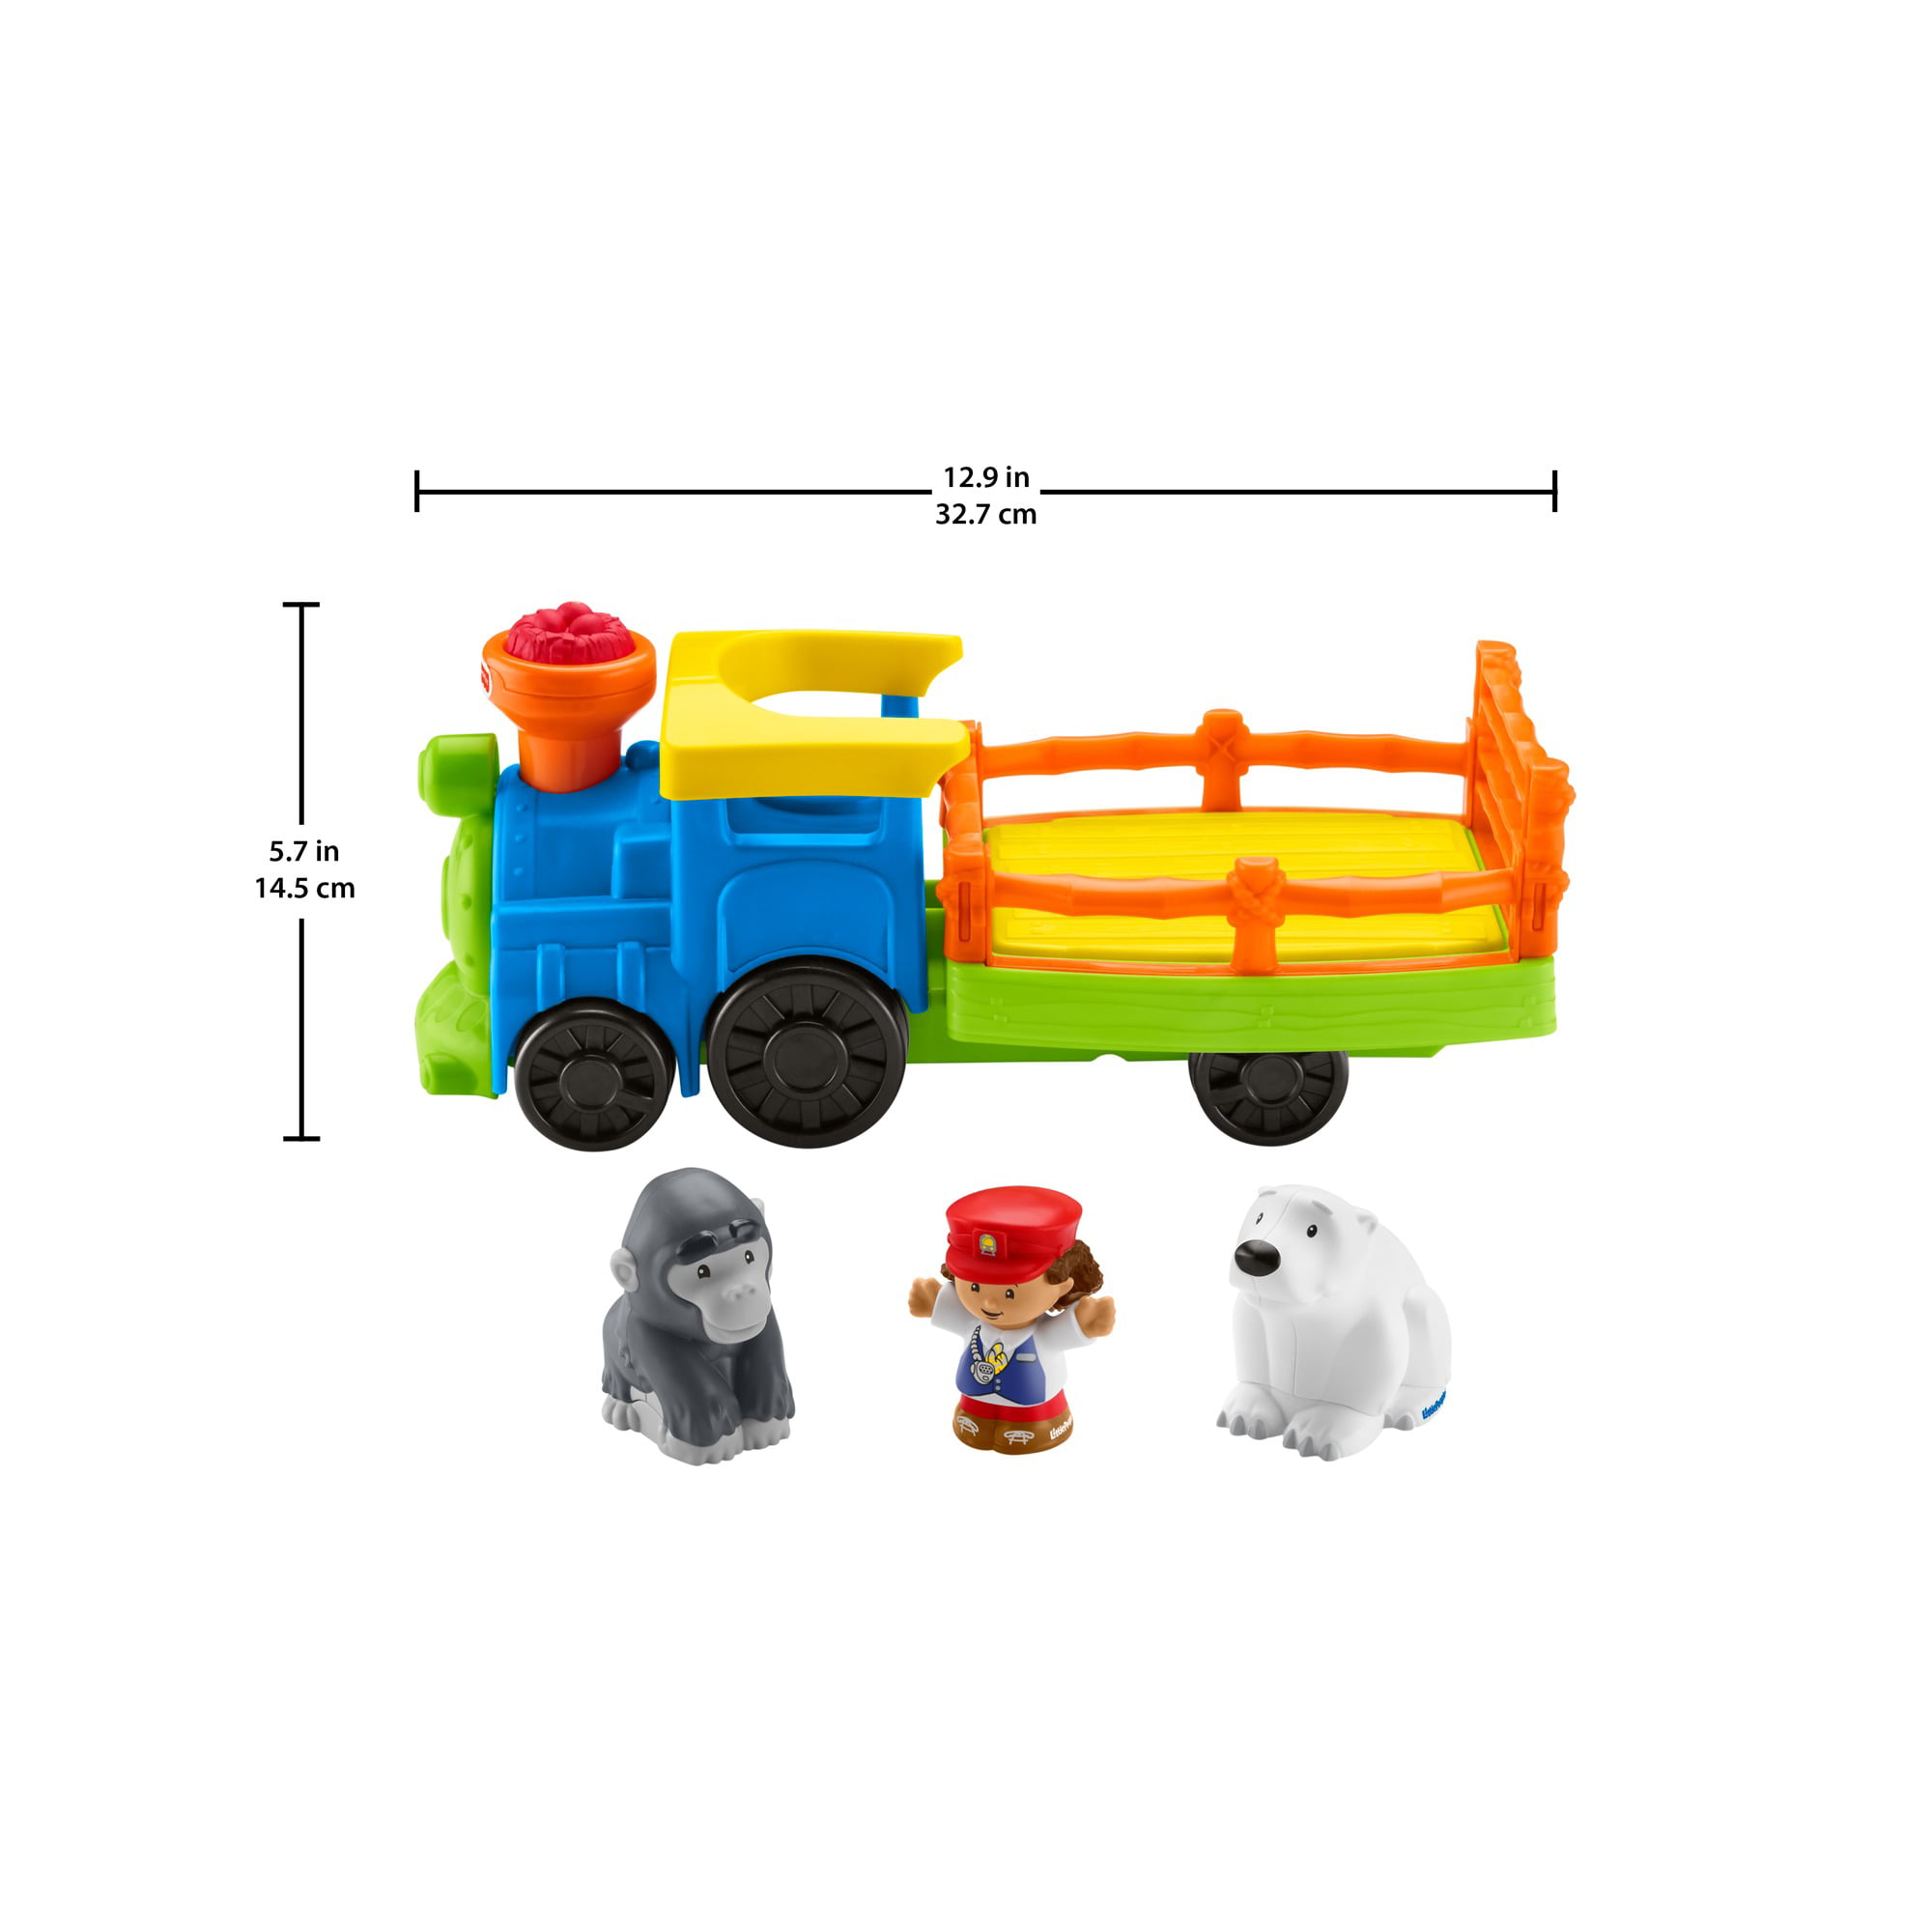 Details about   New Fisher Price Little People ZOO SAFARI TRAIN WAGON VEHICLE ONLY w/ sounds #2 